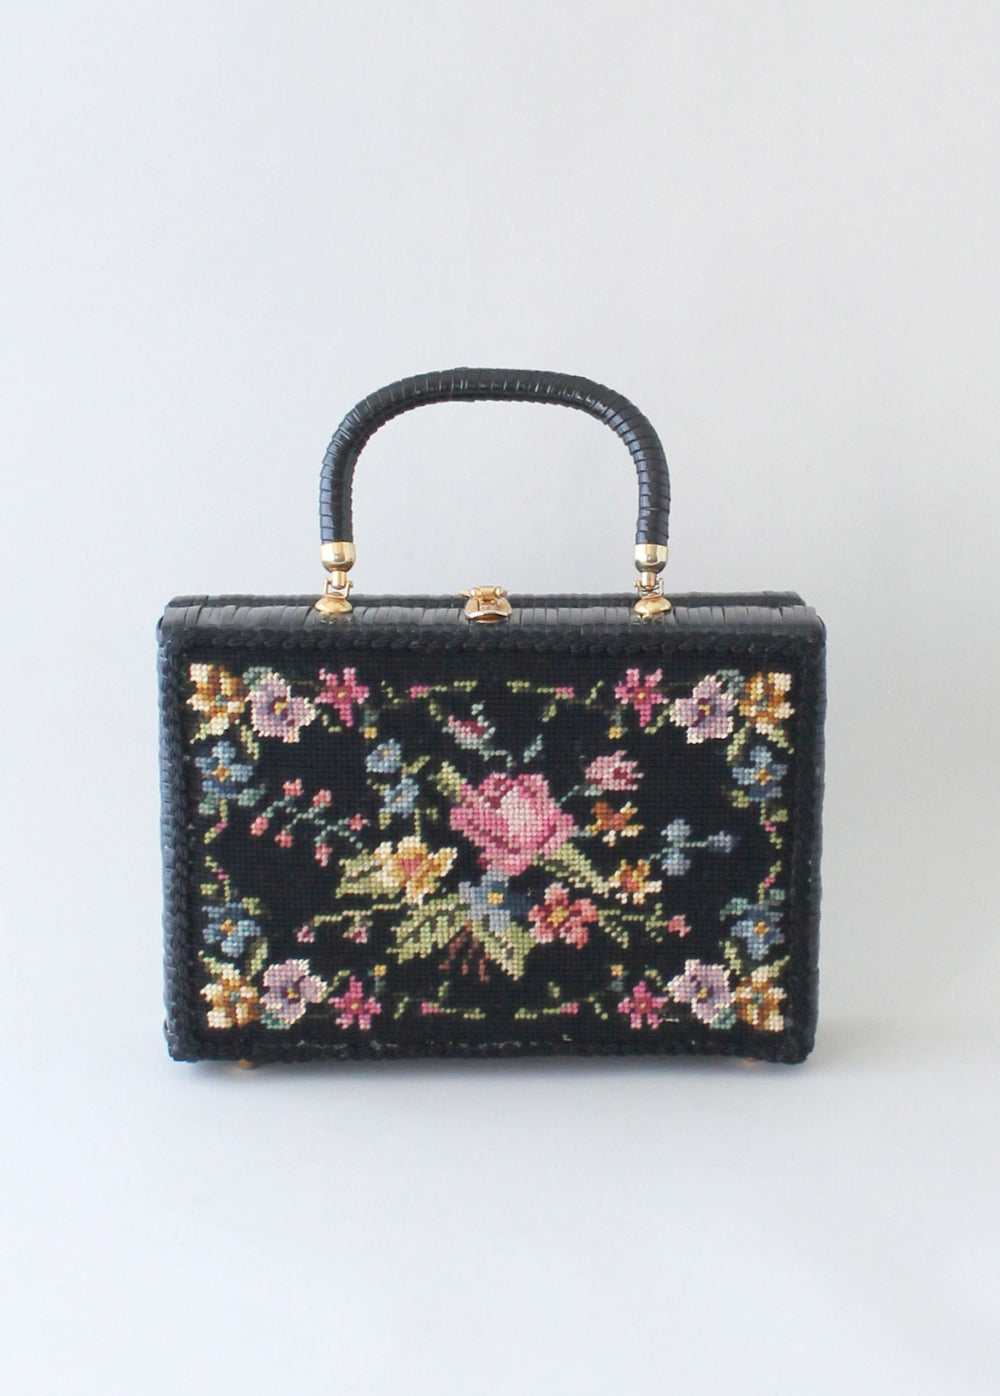 Vintage 1960s Black Wicker Box Purse with Floral Needlework - Raleigh ...